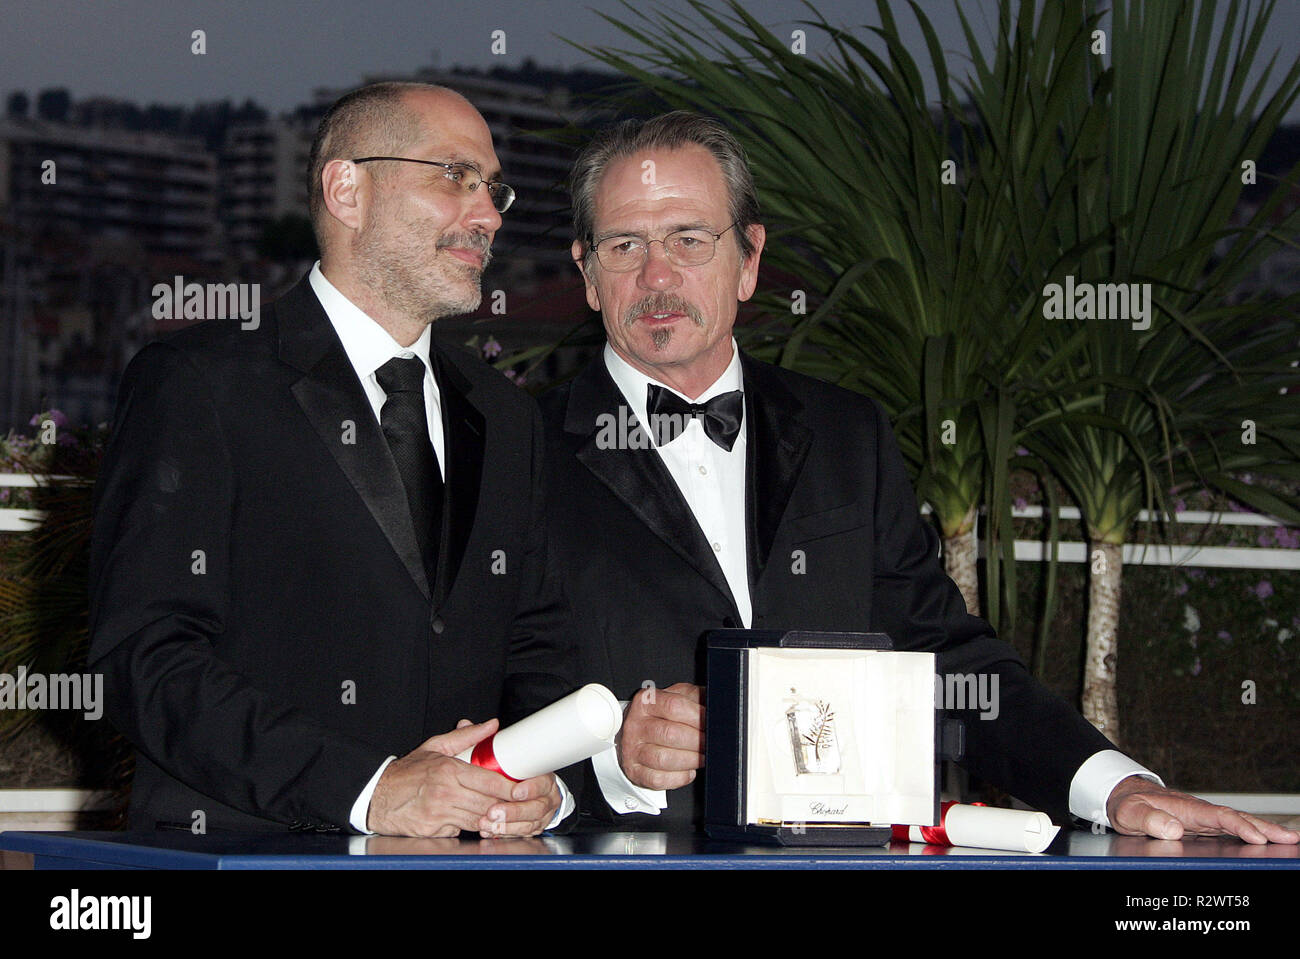 GUILLERMO ARRIAGA & TOMMY LEE JONES CLOSING CEREMONY PHOTOCALL 2005 CANNES FILM FESTIVAL CANNES FRANCE 21 May 2005 Stock Photo